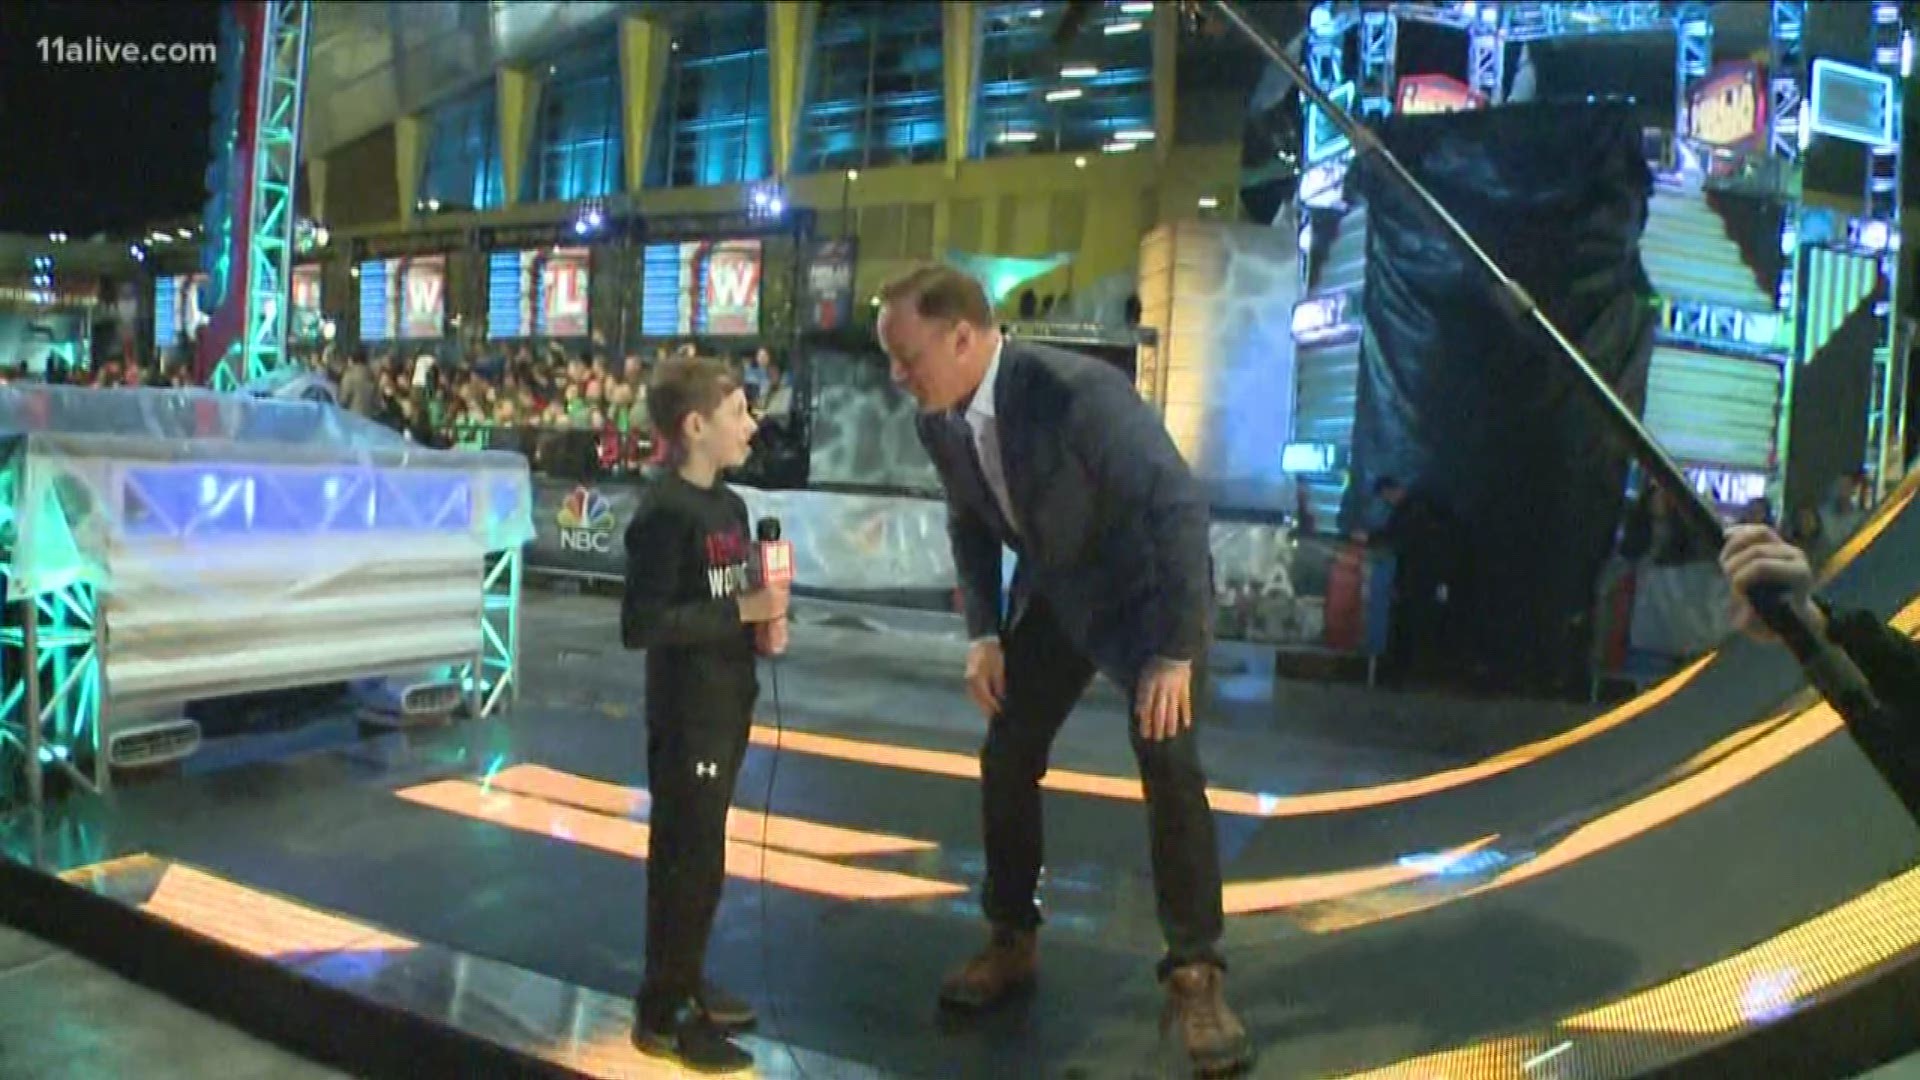 11alive took Nathan along to be our reporter on the scene!